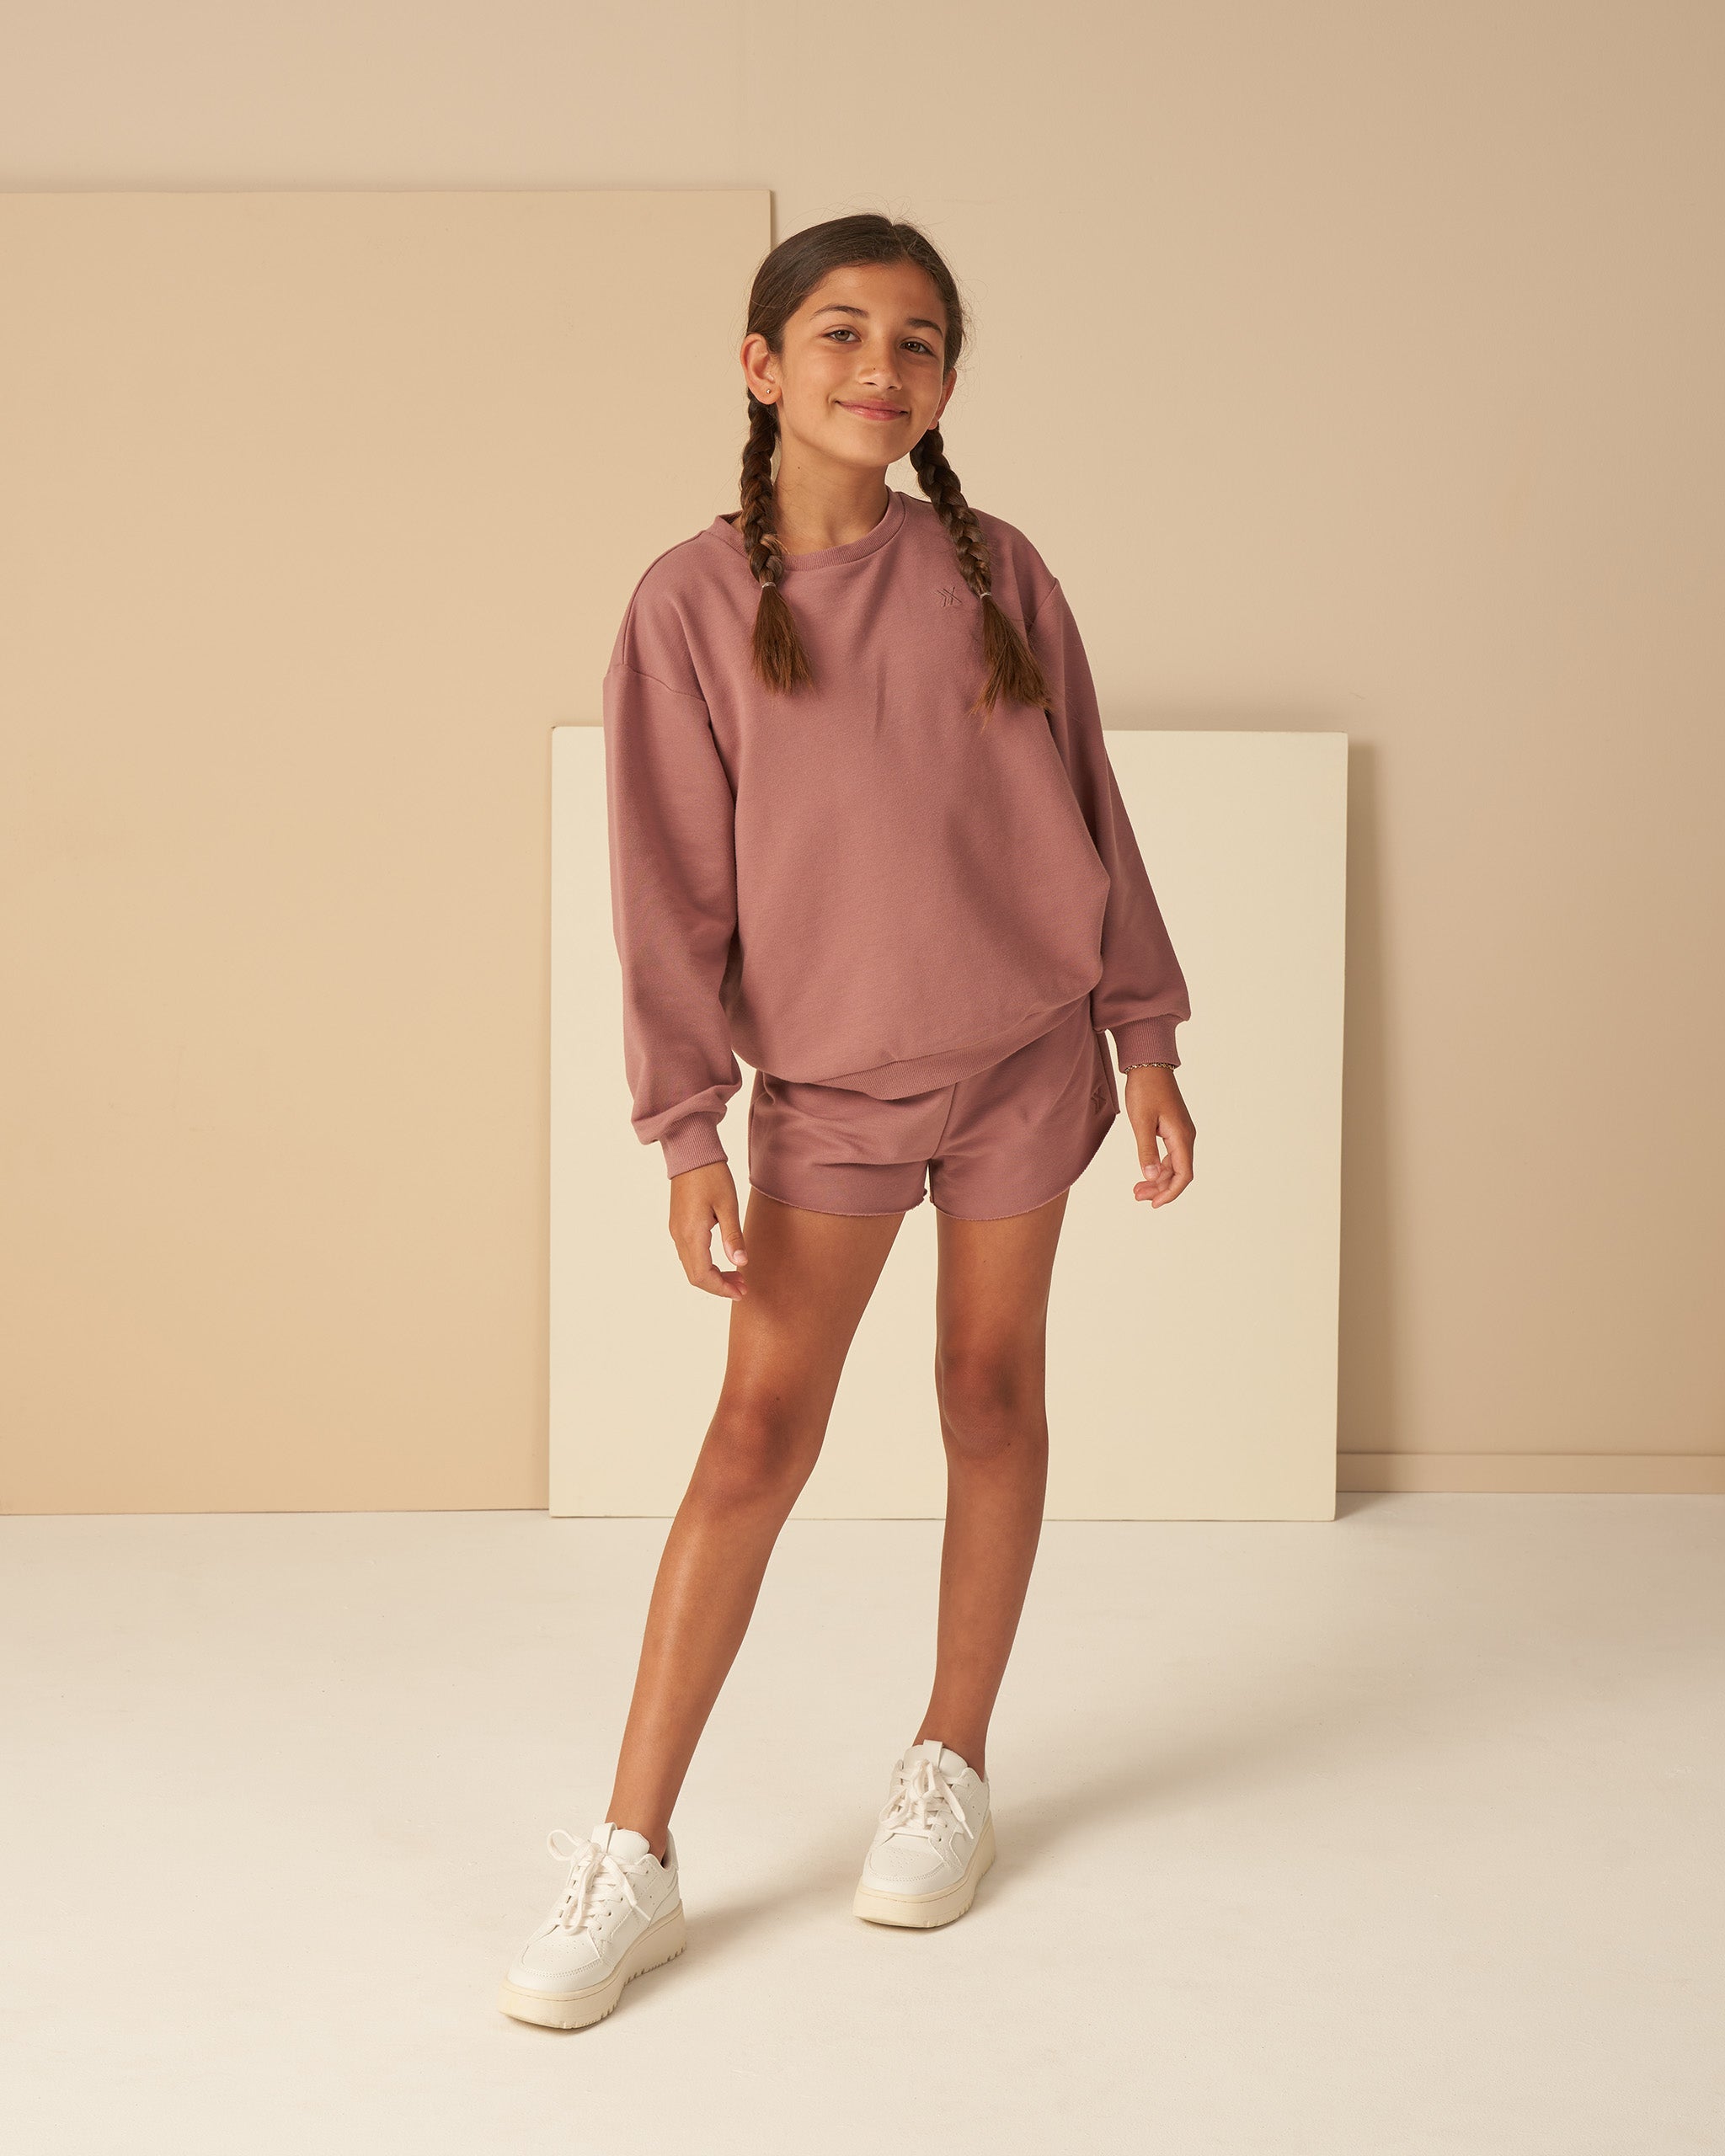 Relaxed Sweatshirt || Mulberry - Rylee + Cru | Kids Clothes | Trendy Baby Clothes | Modern Infant Outfits |